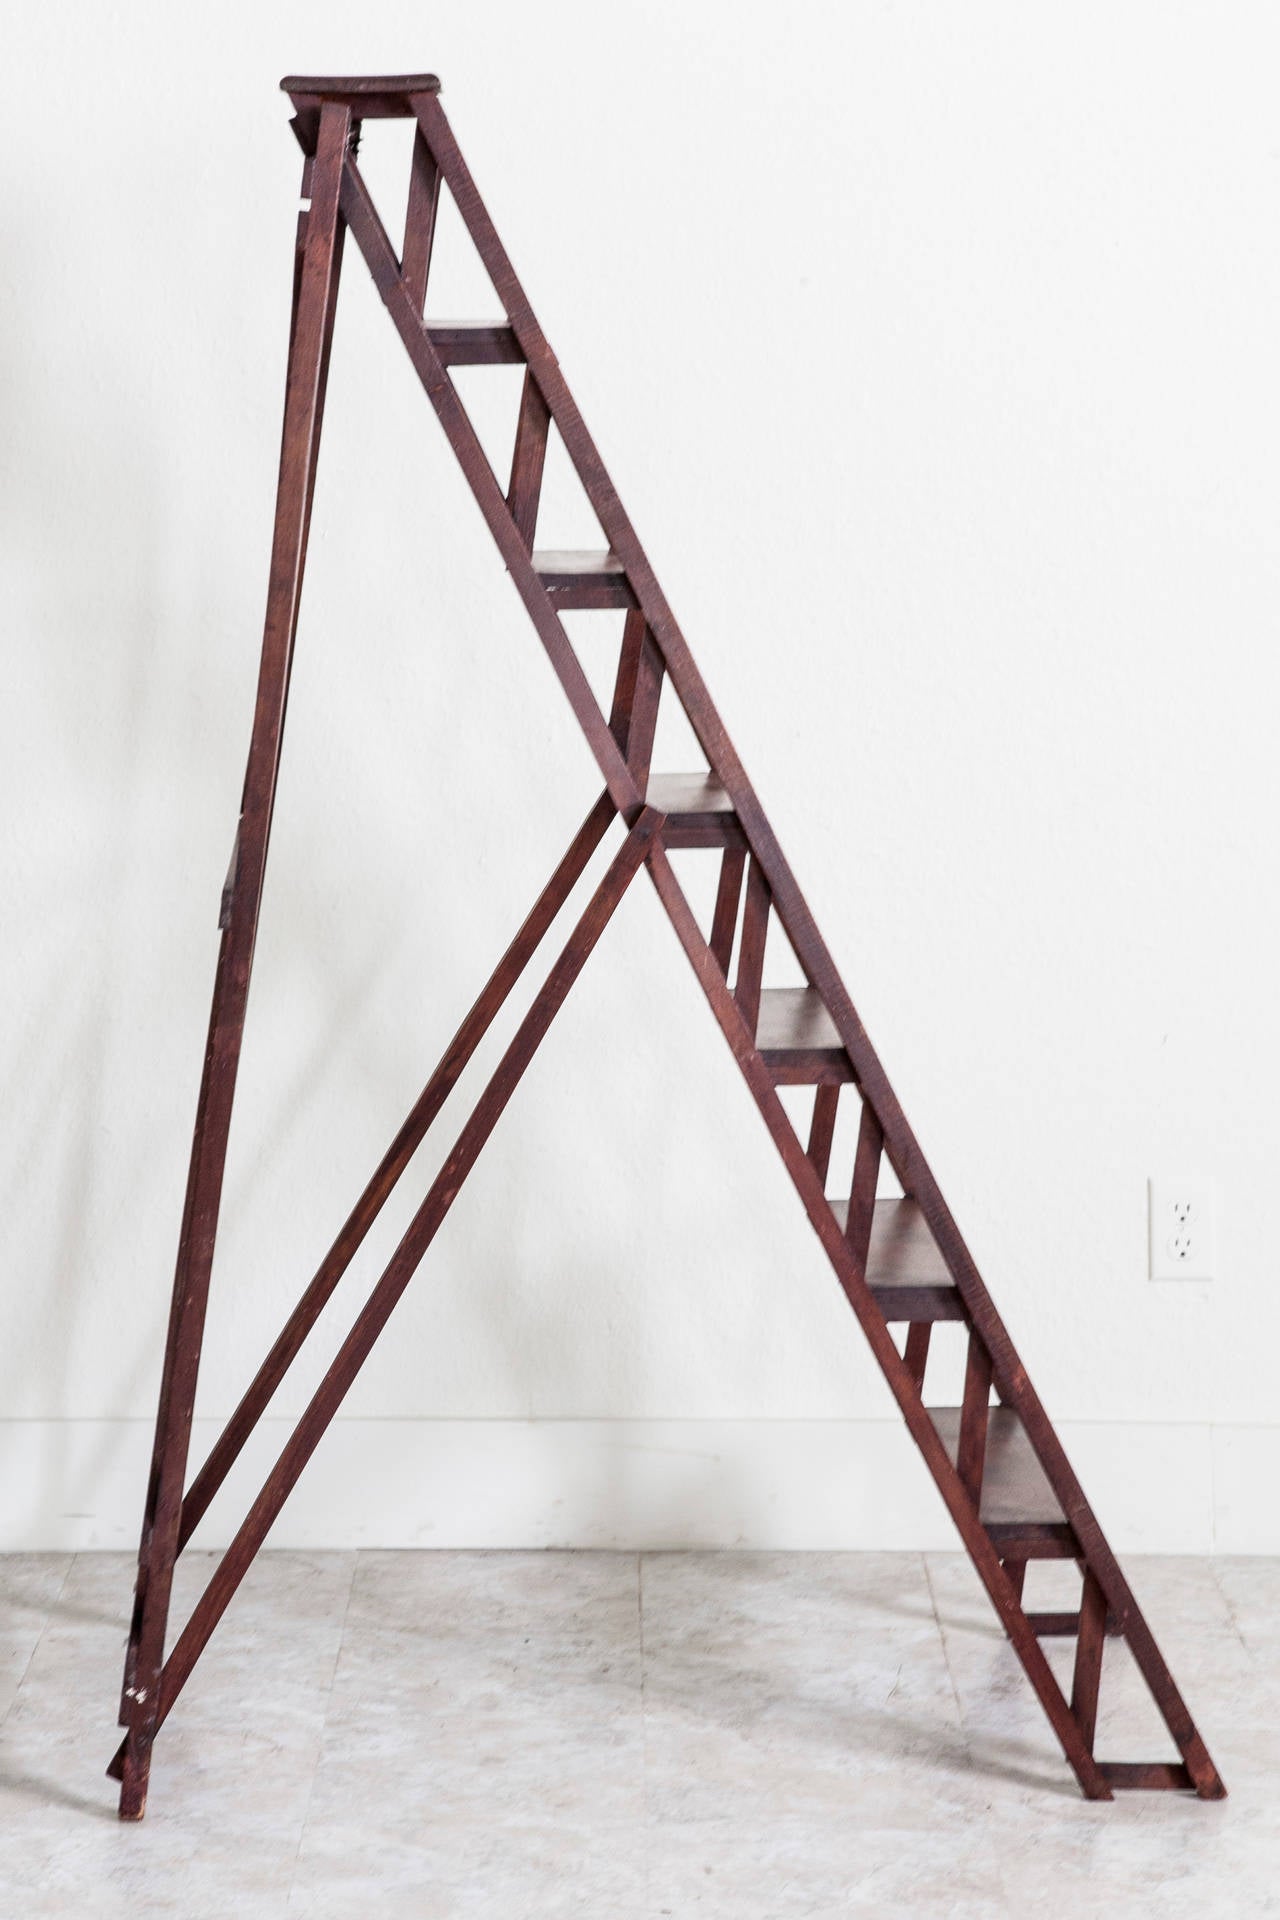 A handsome addition to any space with hard to reach shelving, this artisan made beech wood ladder was originally used in a French library. Although this piece displays beautifully as decor, it remains sturdy enough for daily use as a ladder, and at